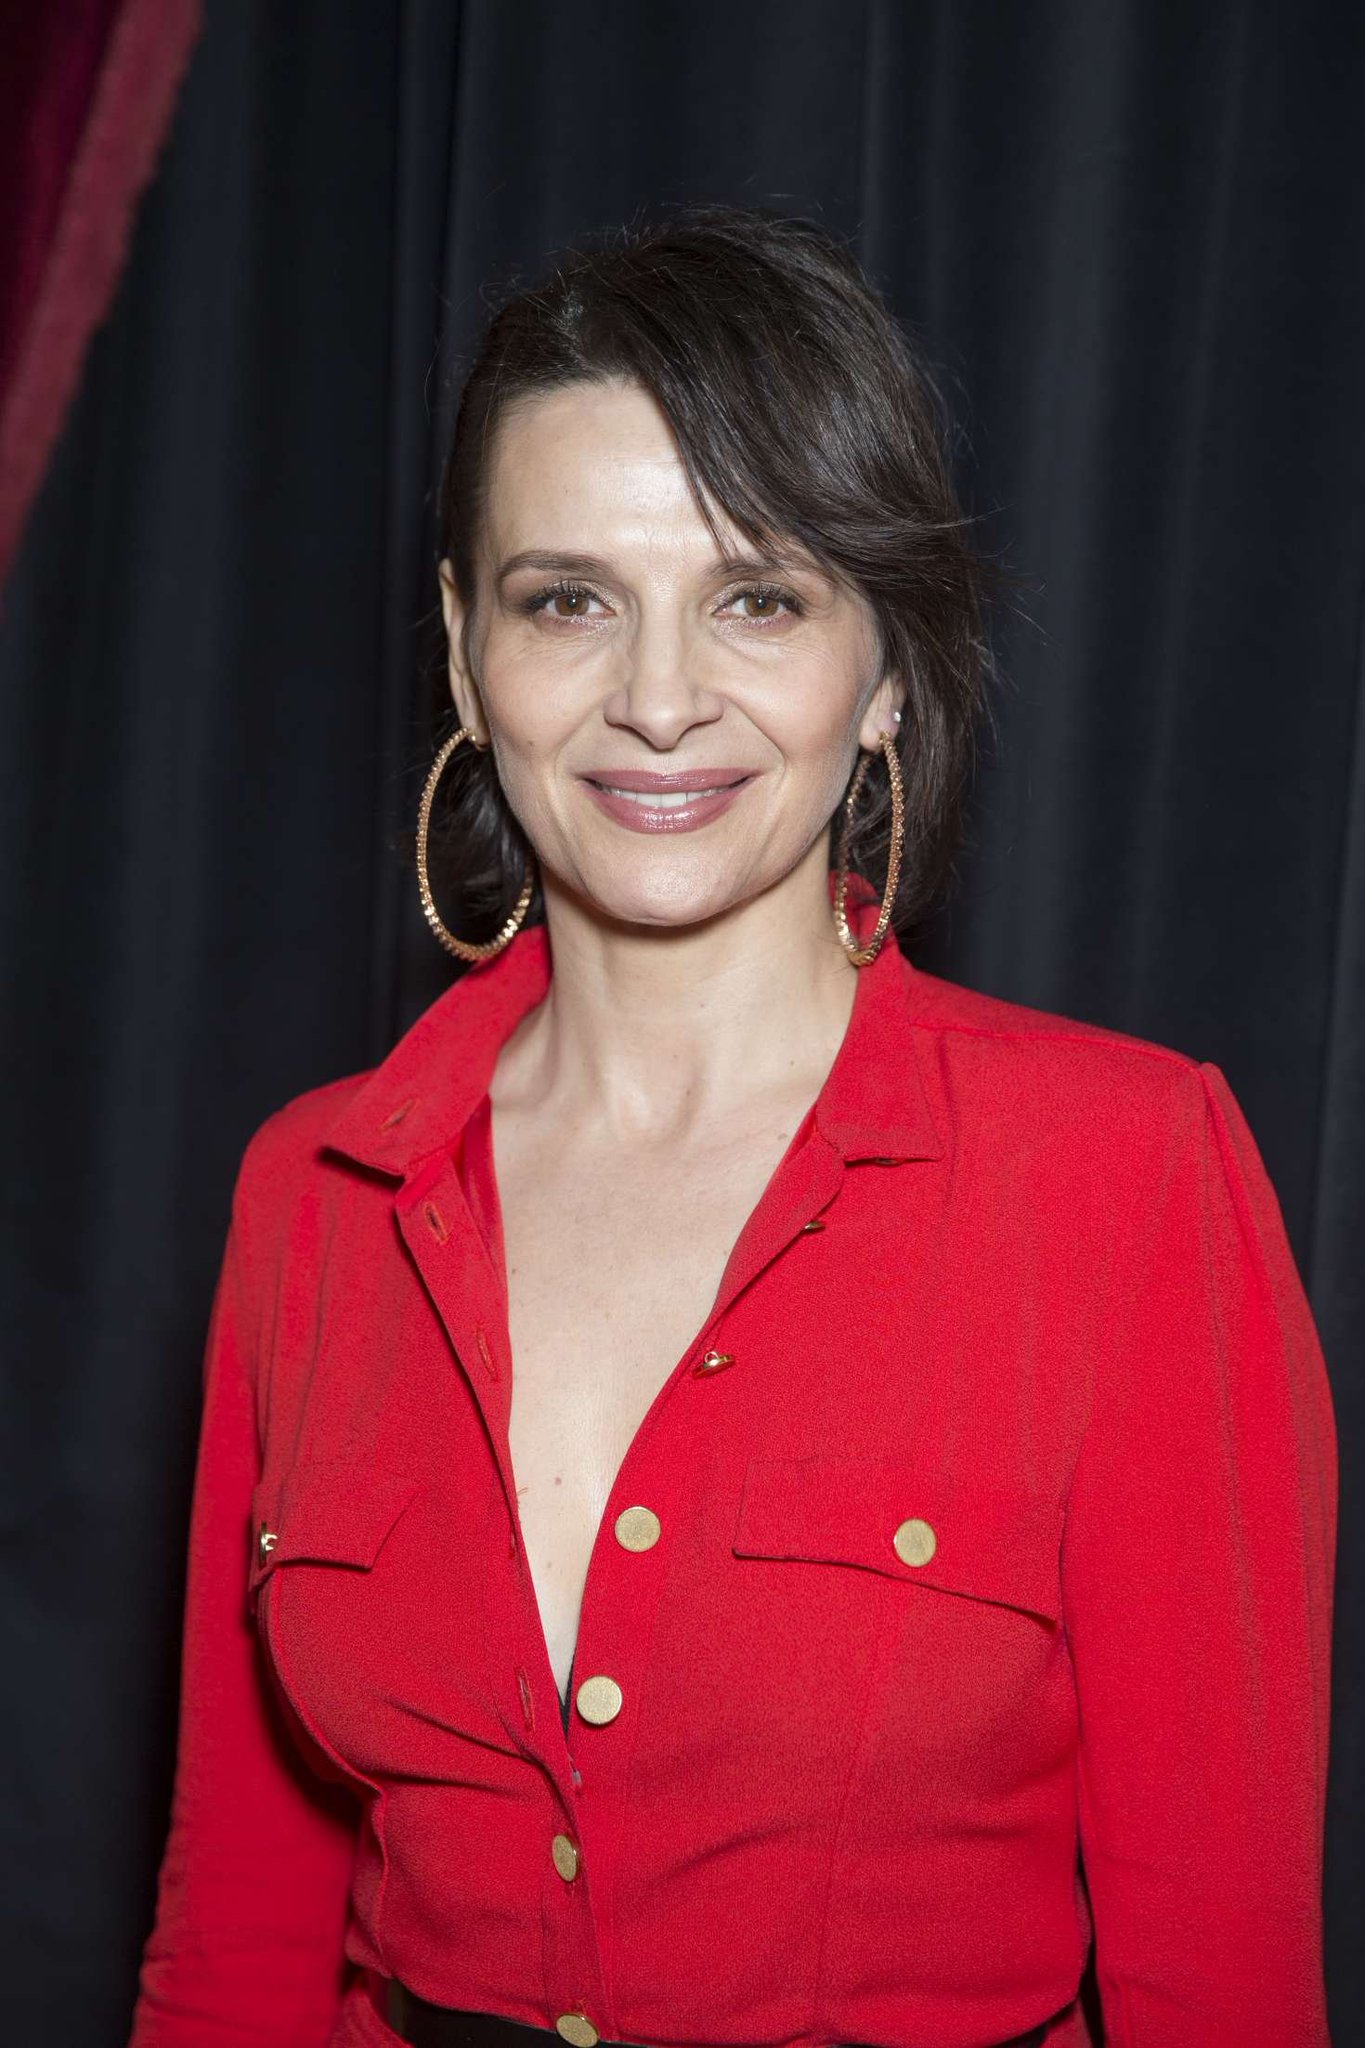 Happy birthday to the godly talented and ever beautiful Juliette Binoche! 